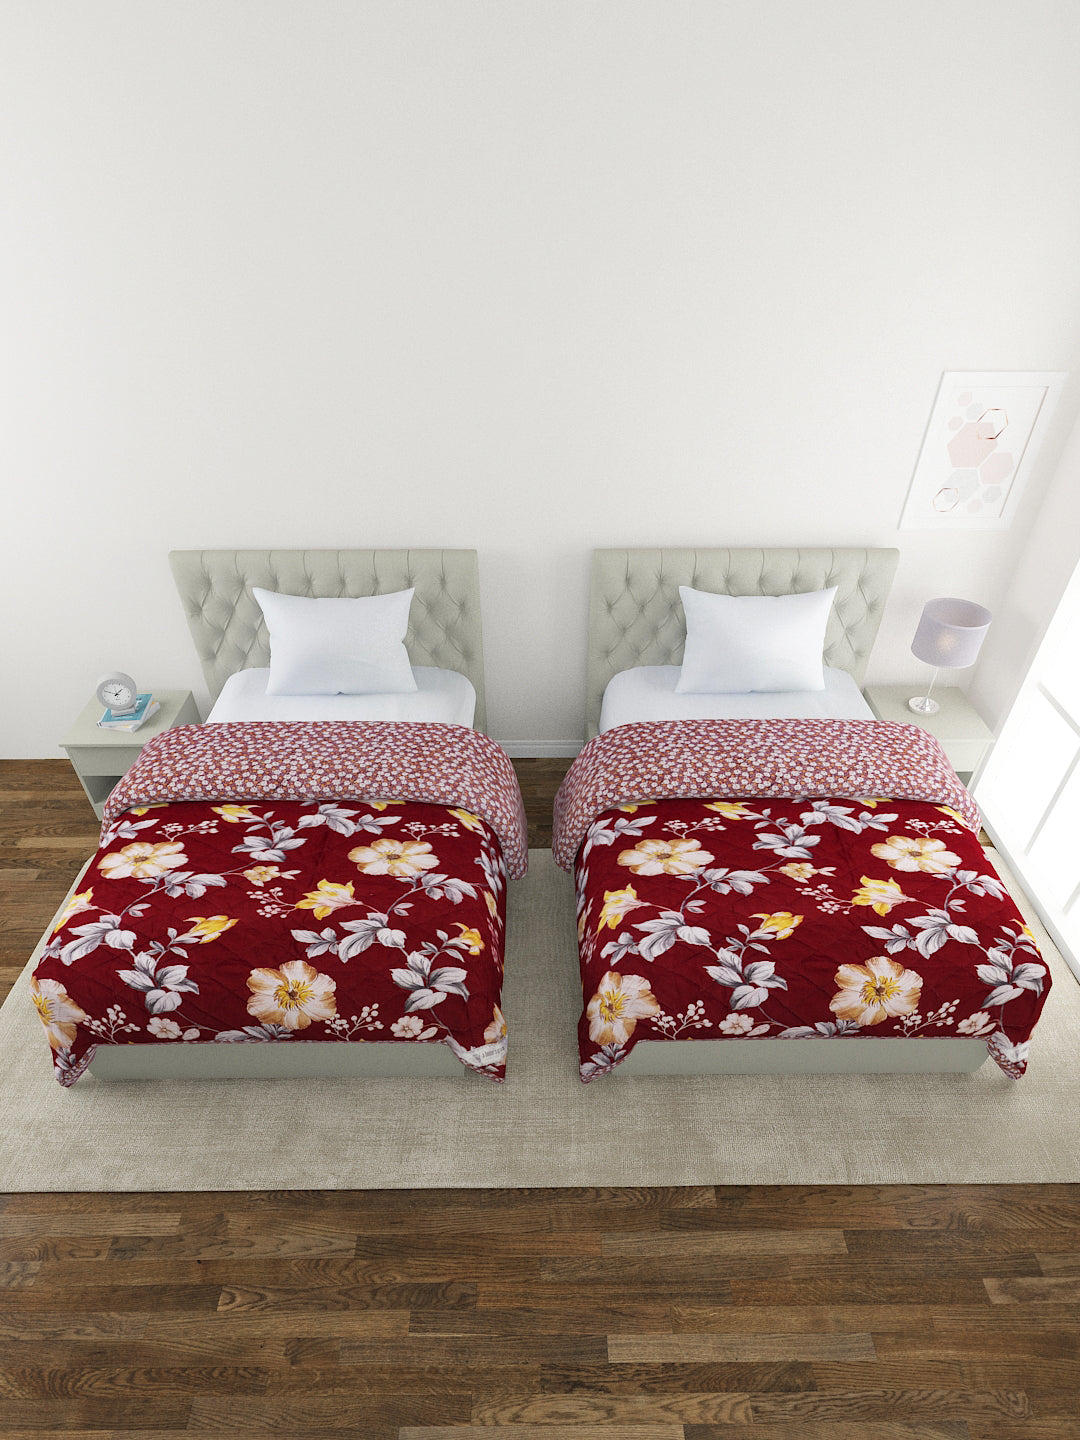 Floral Print Set of 2 Single Bed Light Weight Comforter-Maroon